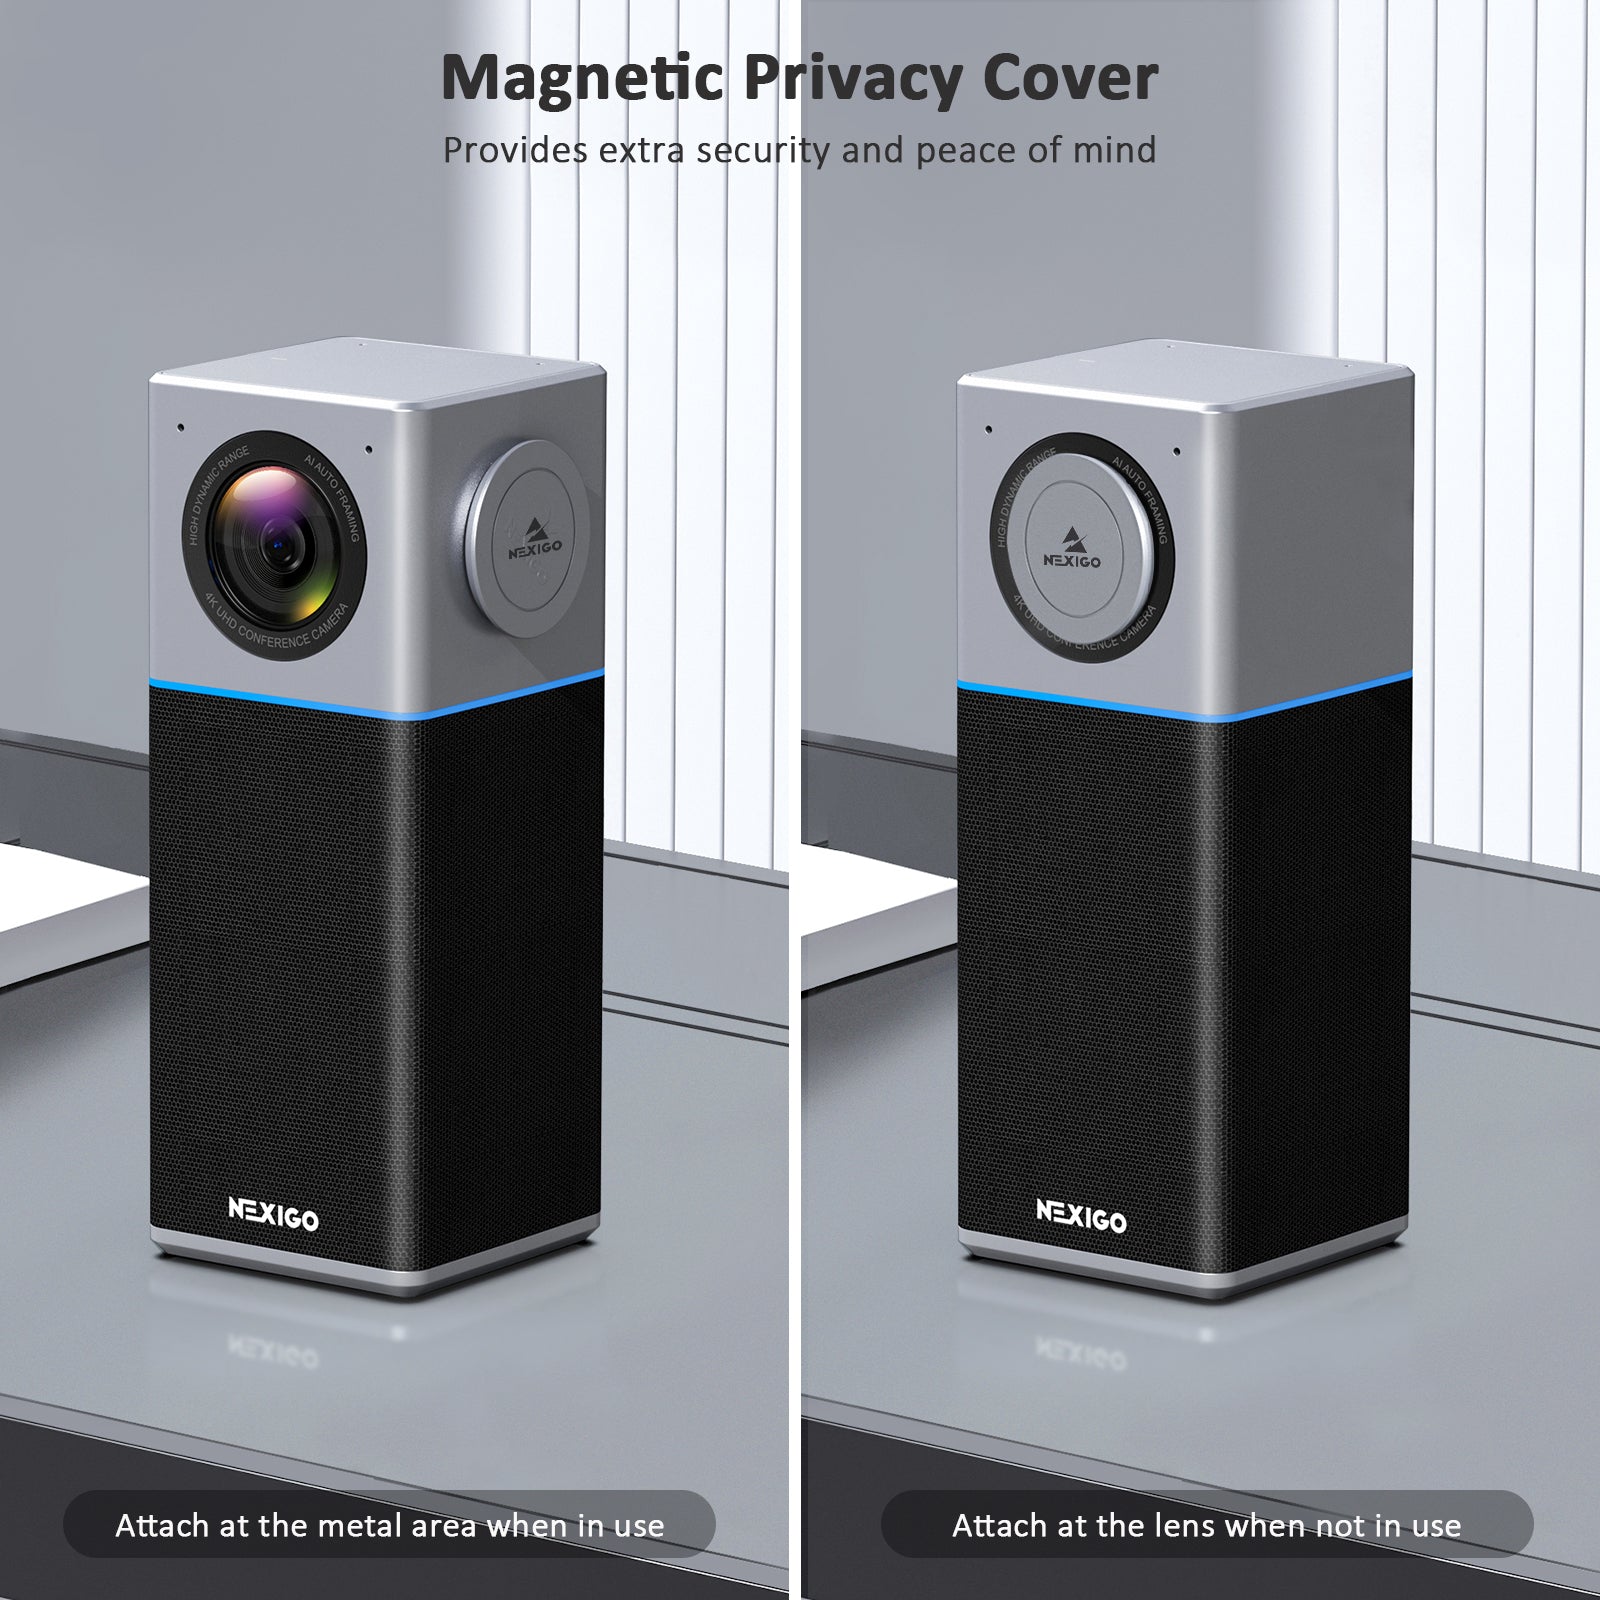 Conference Camera with magnetic privacy cover, attaches magnetically when not in use.